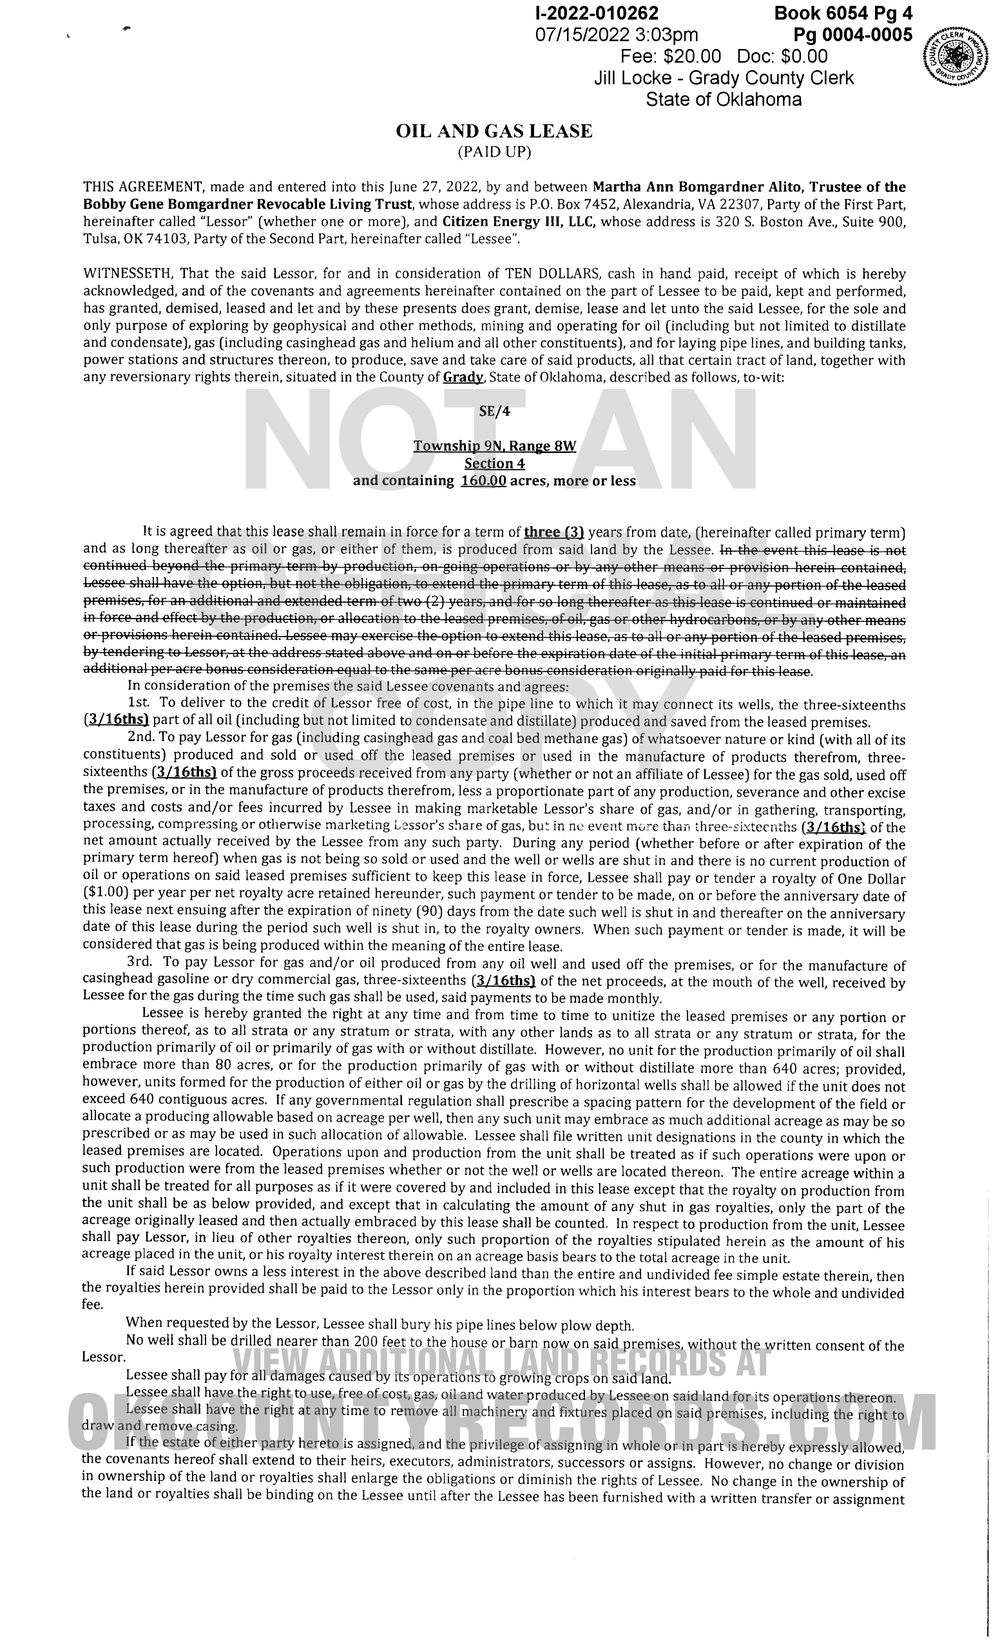 Page 1 from Alito Oil and Gas Lease